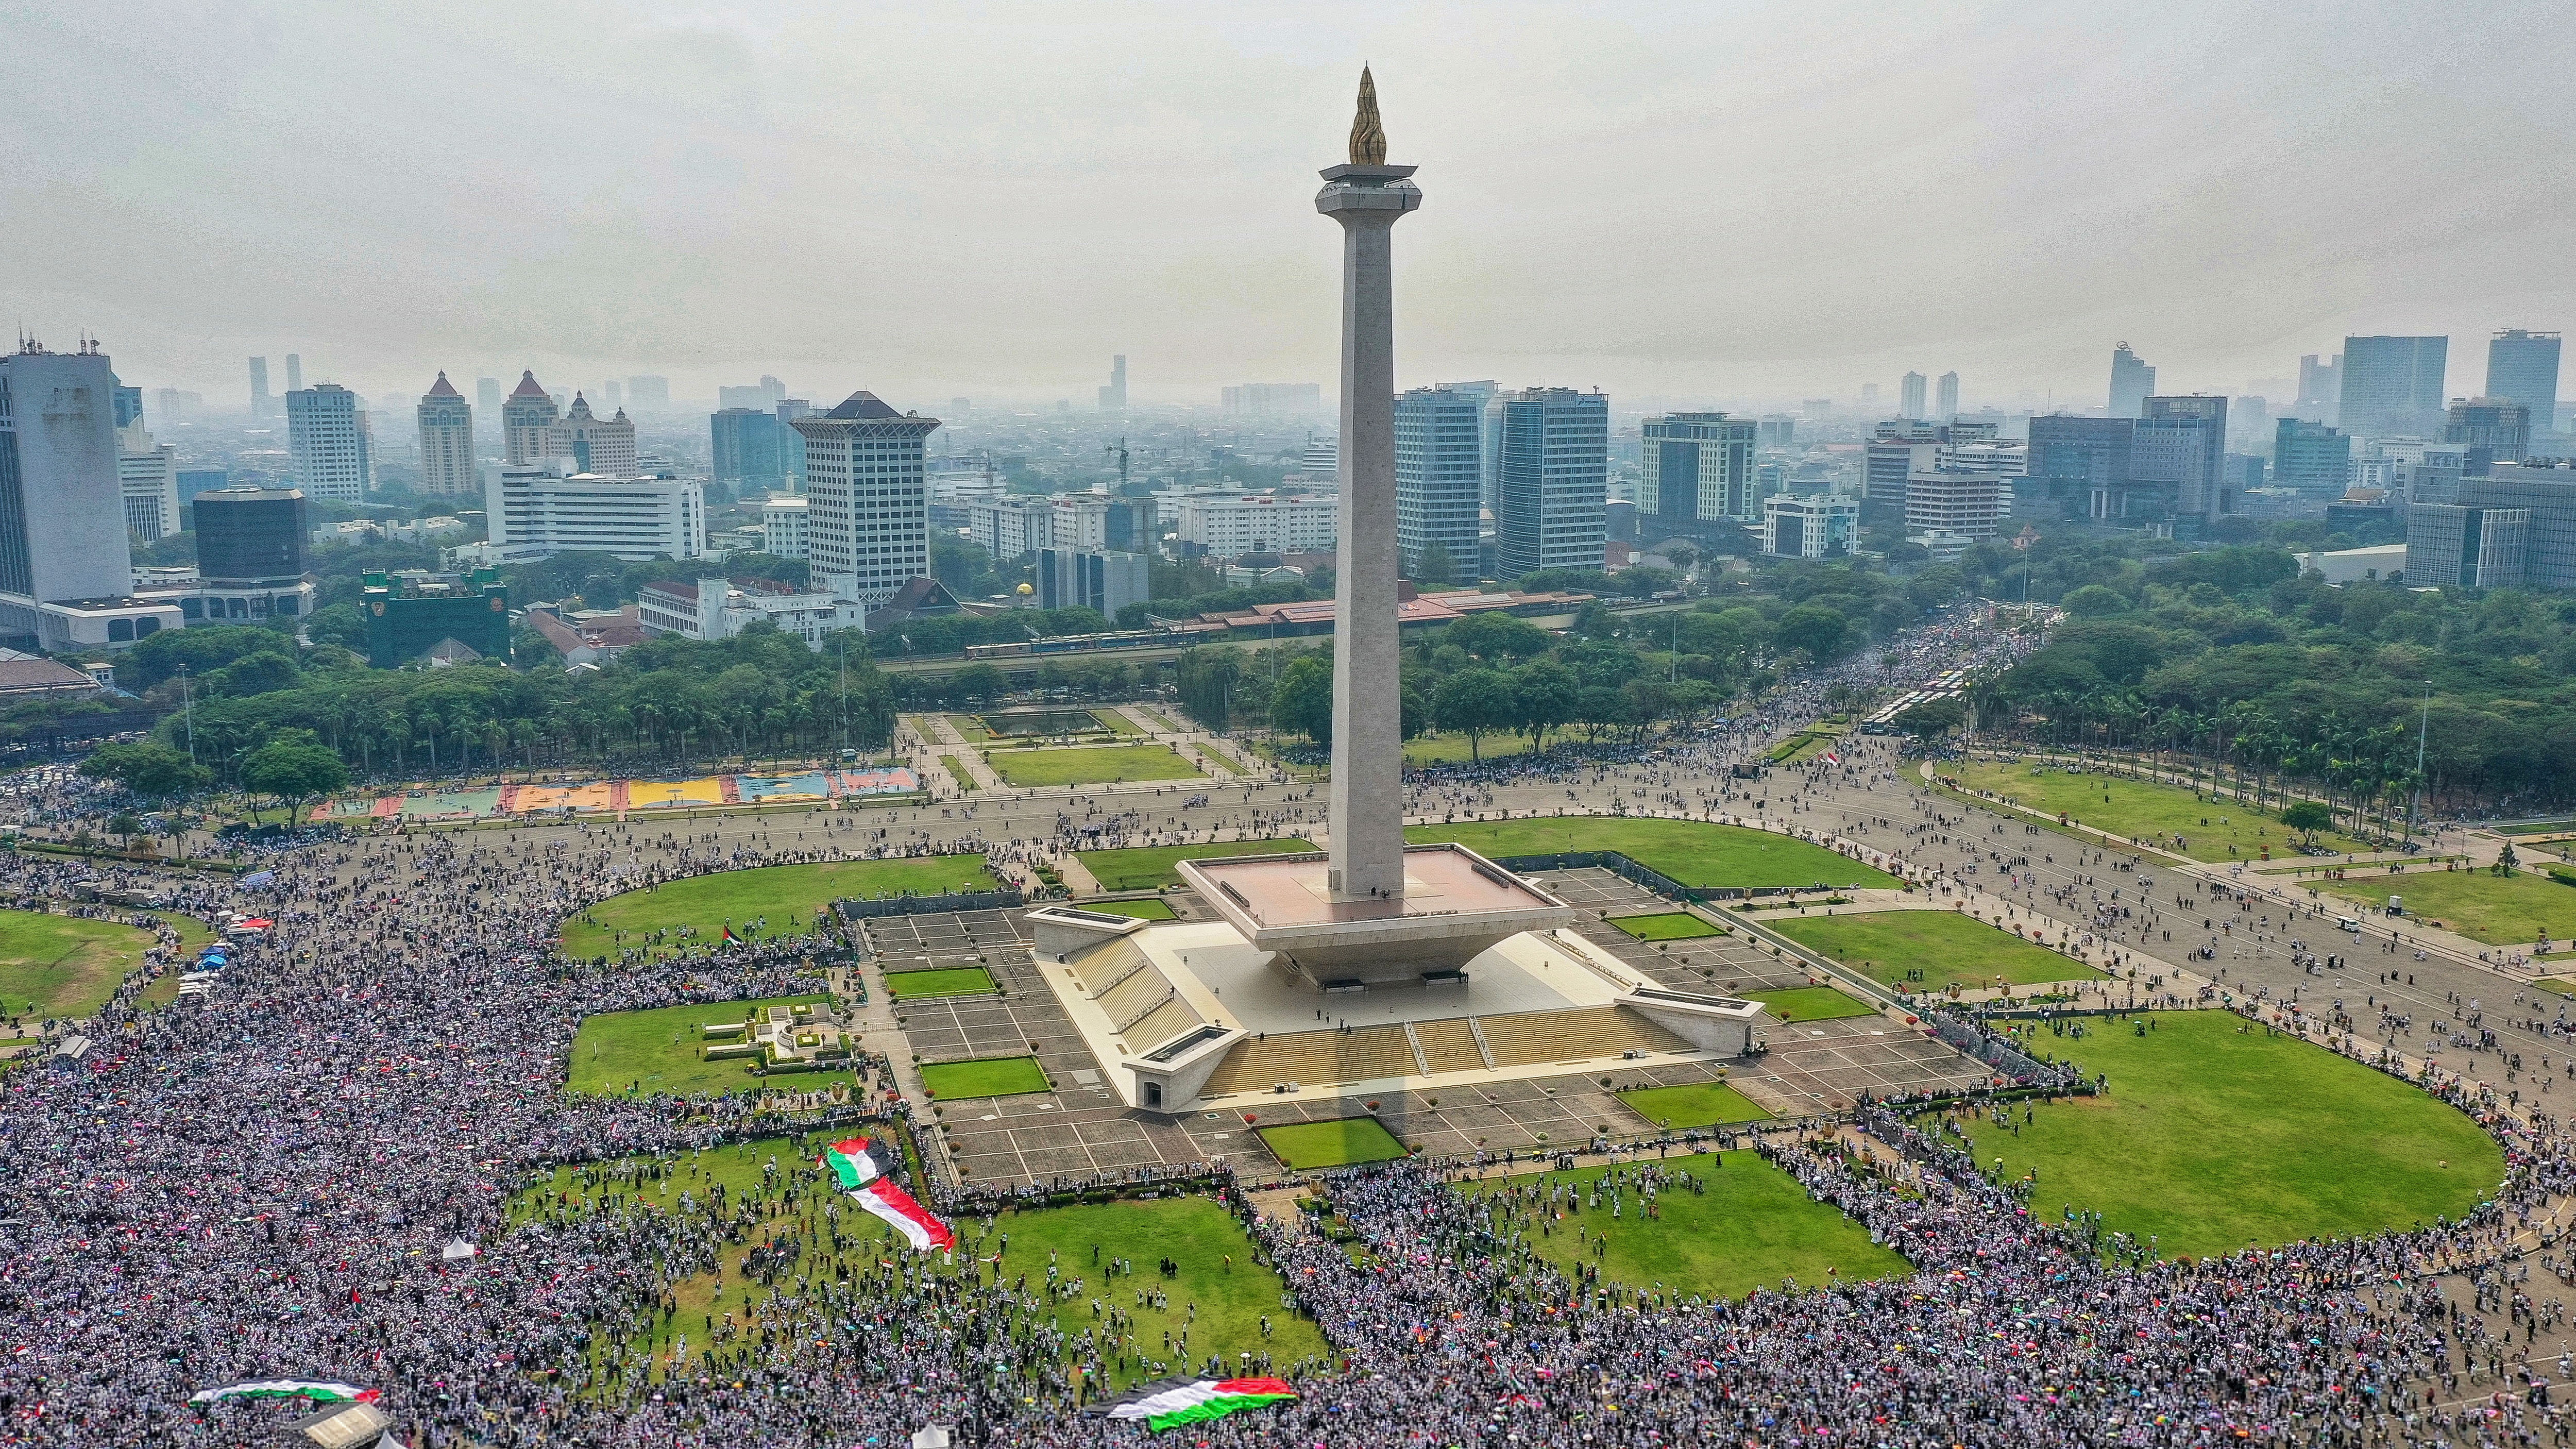 People gather at Jakarta's National Monument (Monas) to attend a rally supporting Palestinians in Gaza. /Antara Foto/Muhbas S/via Reuters